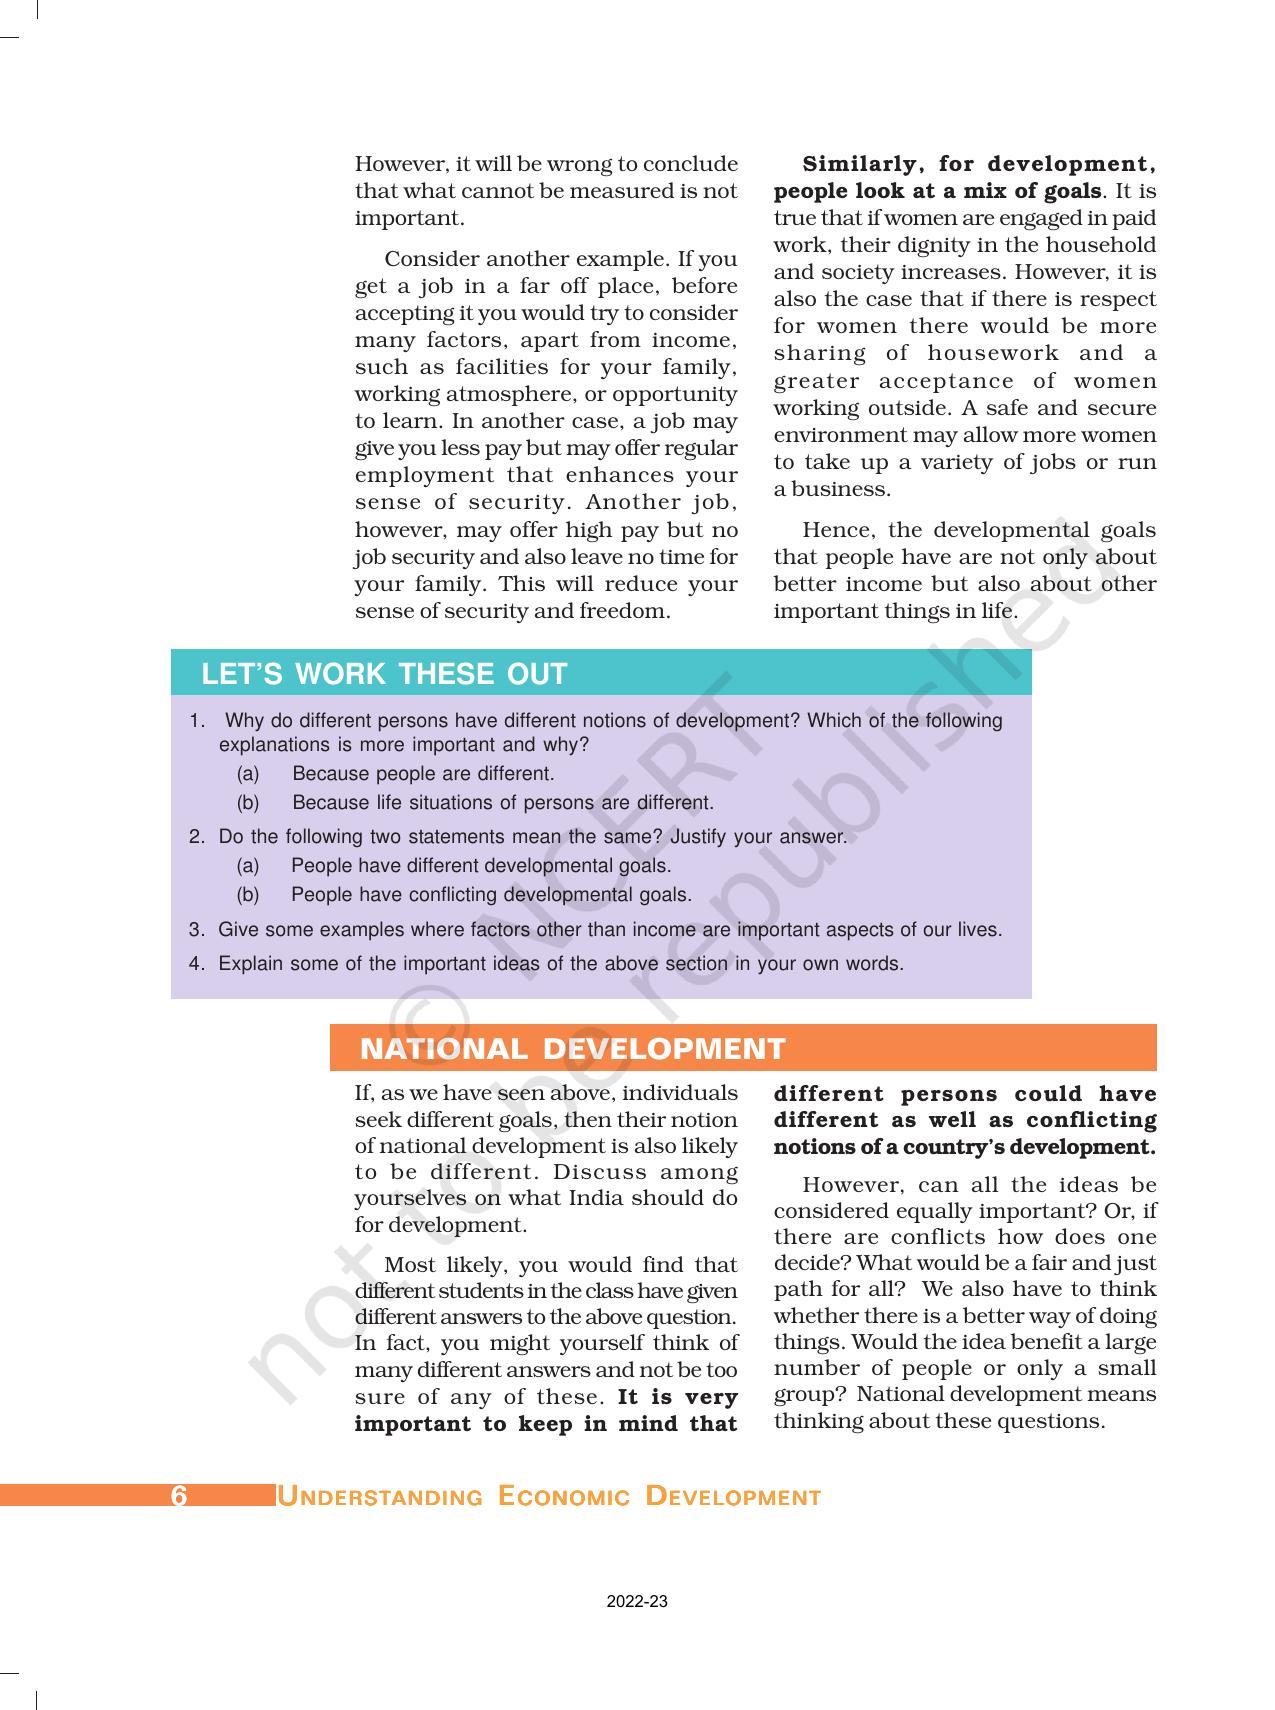 NCERT Book for Class 10 Economics Chapter 1 Development - Page 5